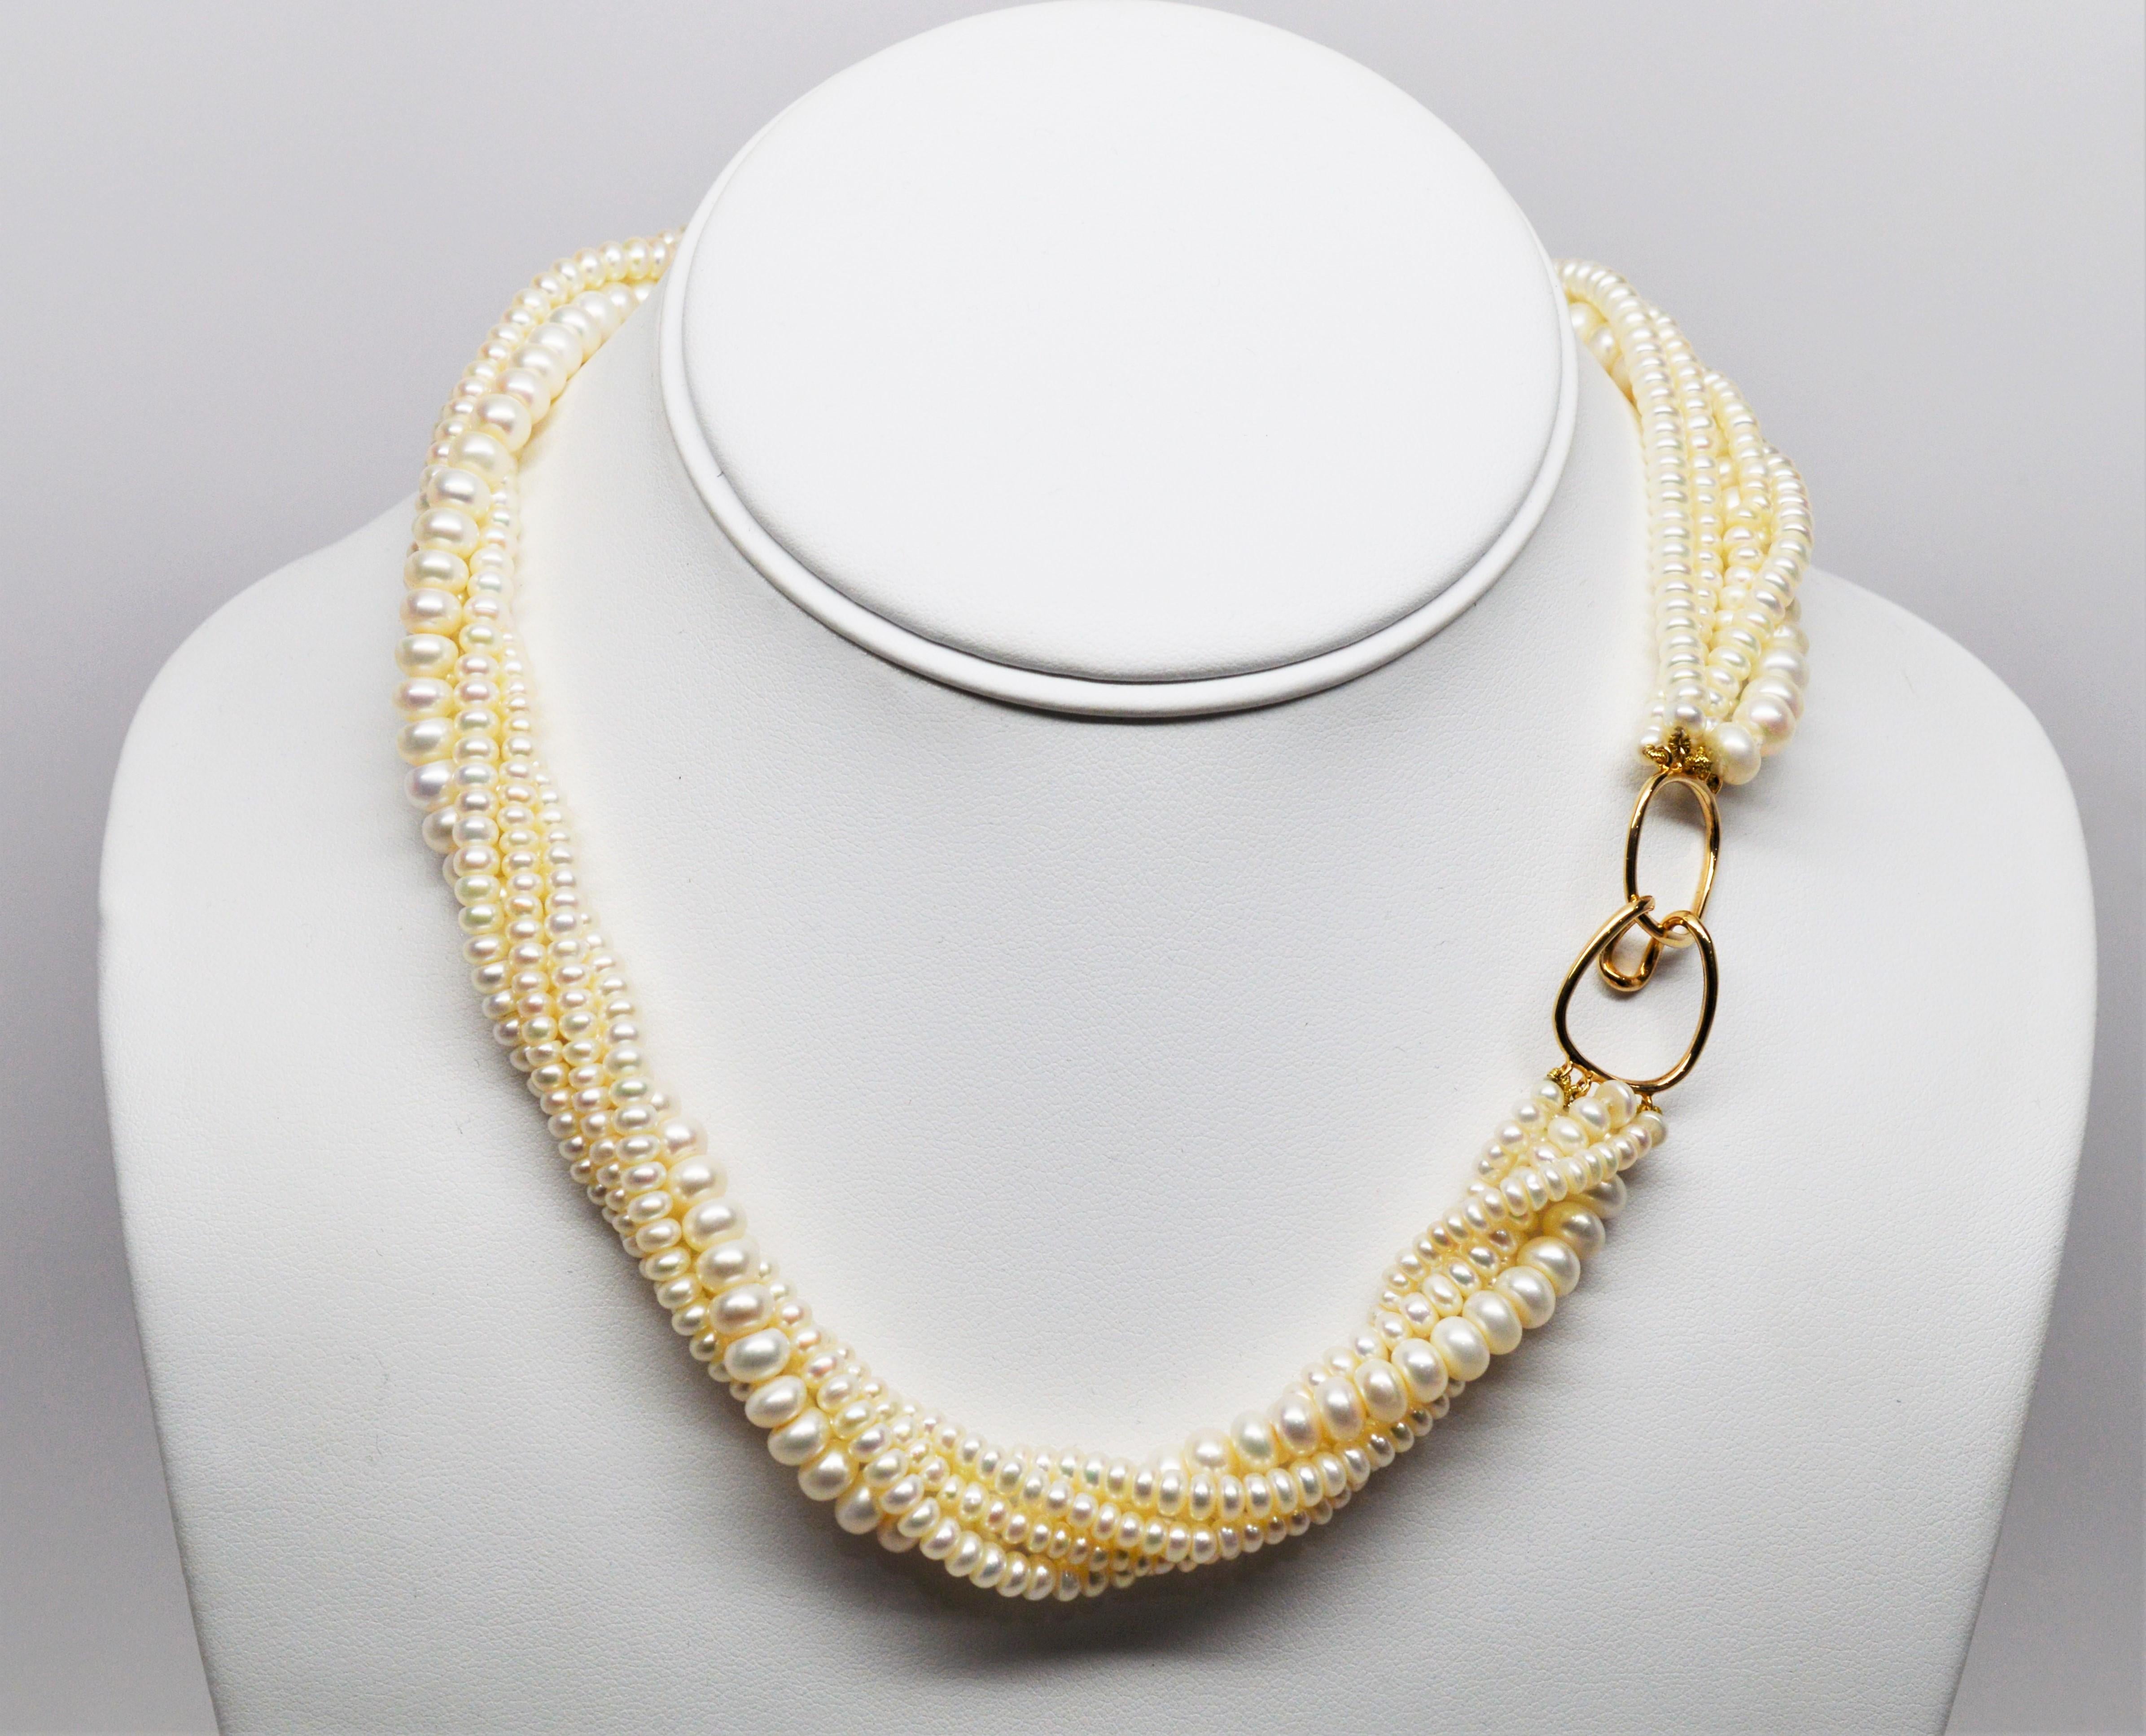 Smart and sophisticated with multiple sixteen inch strands of natural AAA Akoya button pearls ranging in size from 3-1/2 mm to 5-3/4 mm finished with a fourteen carat yellow gold hook clasp. Can be worn in twist or draped for different looks. In